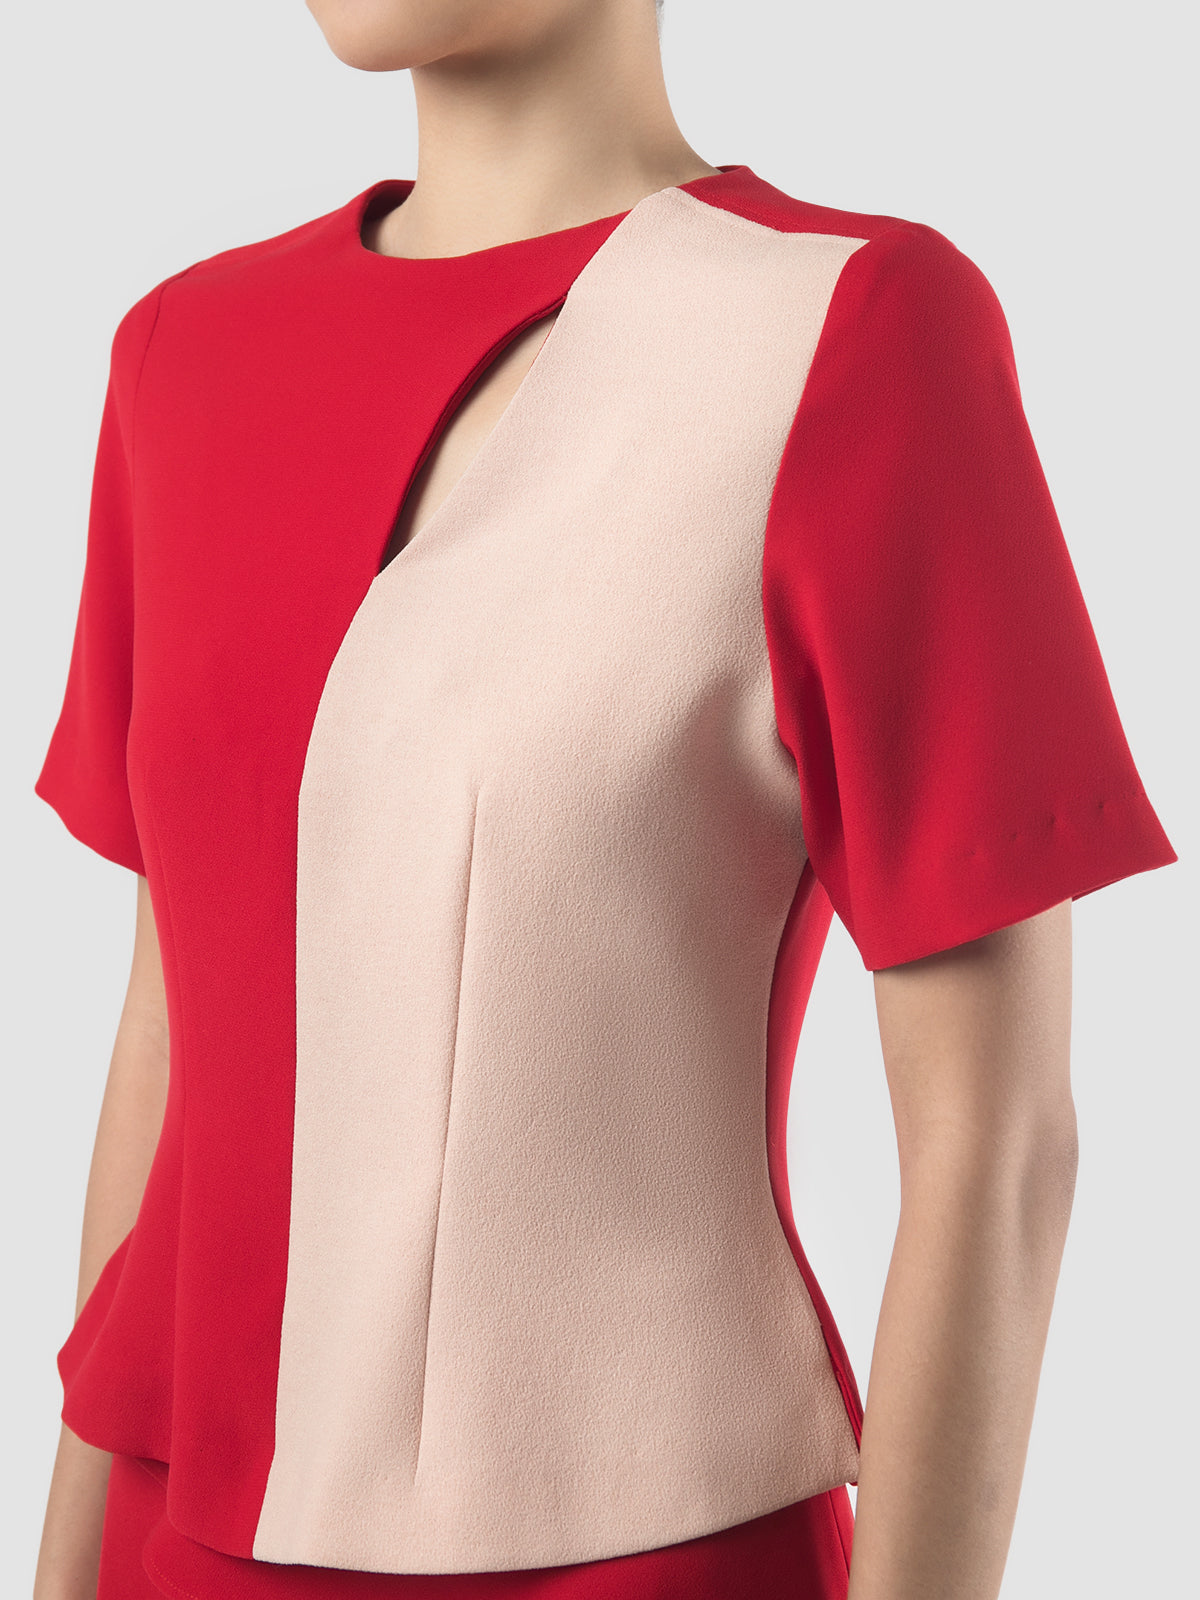 Waltz two-toned red-blush pink blouse